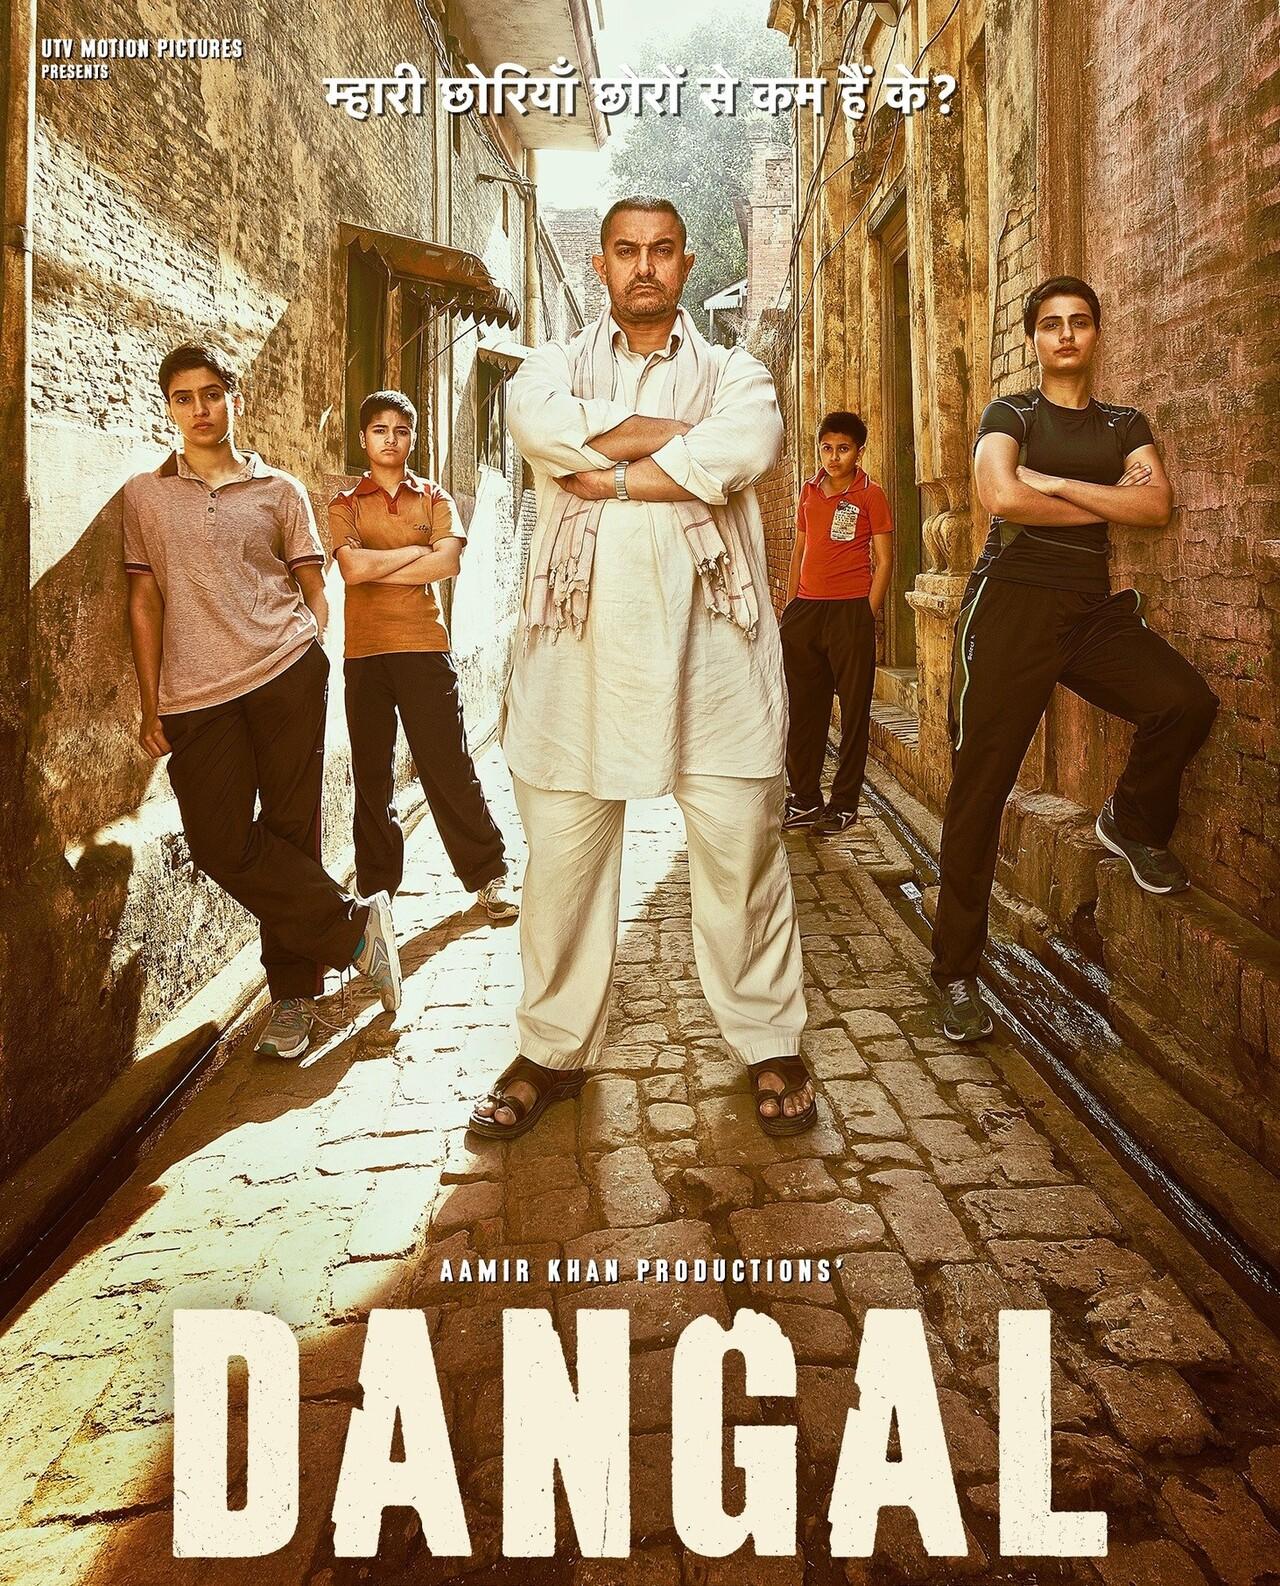 'Dangal' is a biographical sports drama based on the life of wrestler Mahavir Singh Phogat and his daughters, Geeta and Babita Phogat, who achieved success in the world of wrestling, breaking gender stereotypes. The movie stars Aamir Khan, Sakshi Tanwar, Fatima Sana Shaikh, and Sanya Malhotra, among others